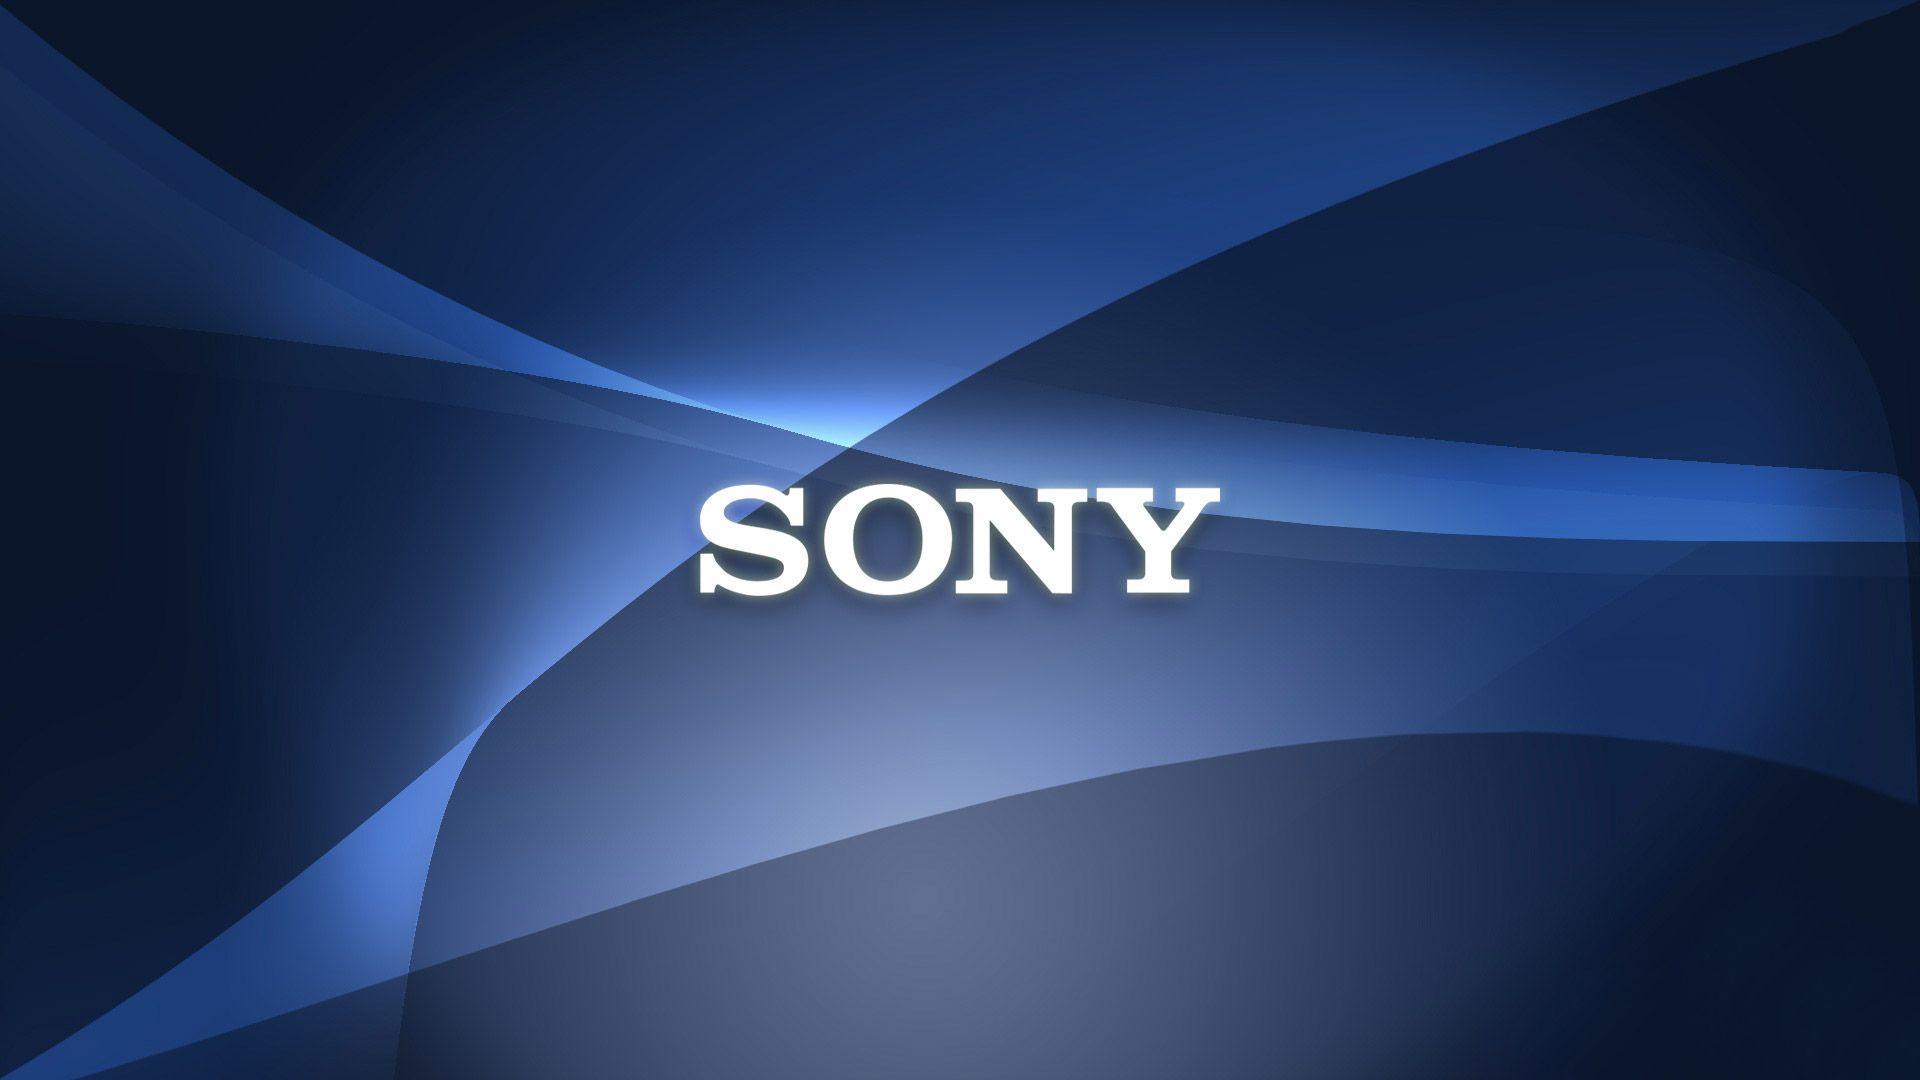 Sony Logo Wallpapers Top Free Sony Logo Backgrounds Wallpaperaccess